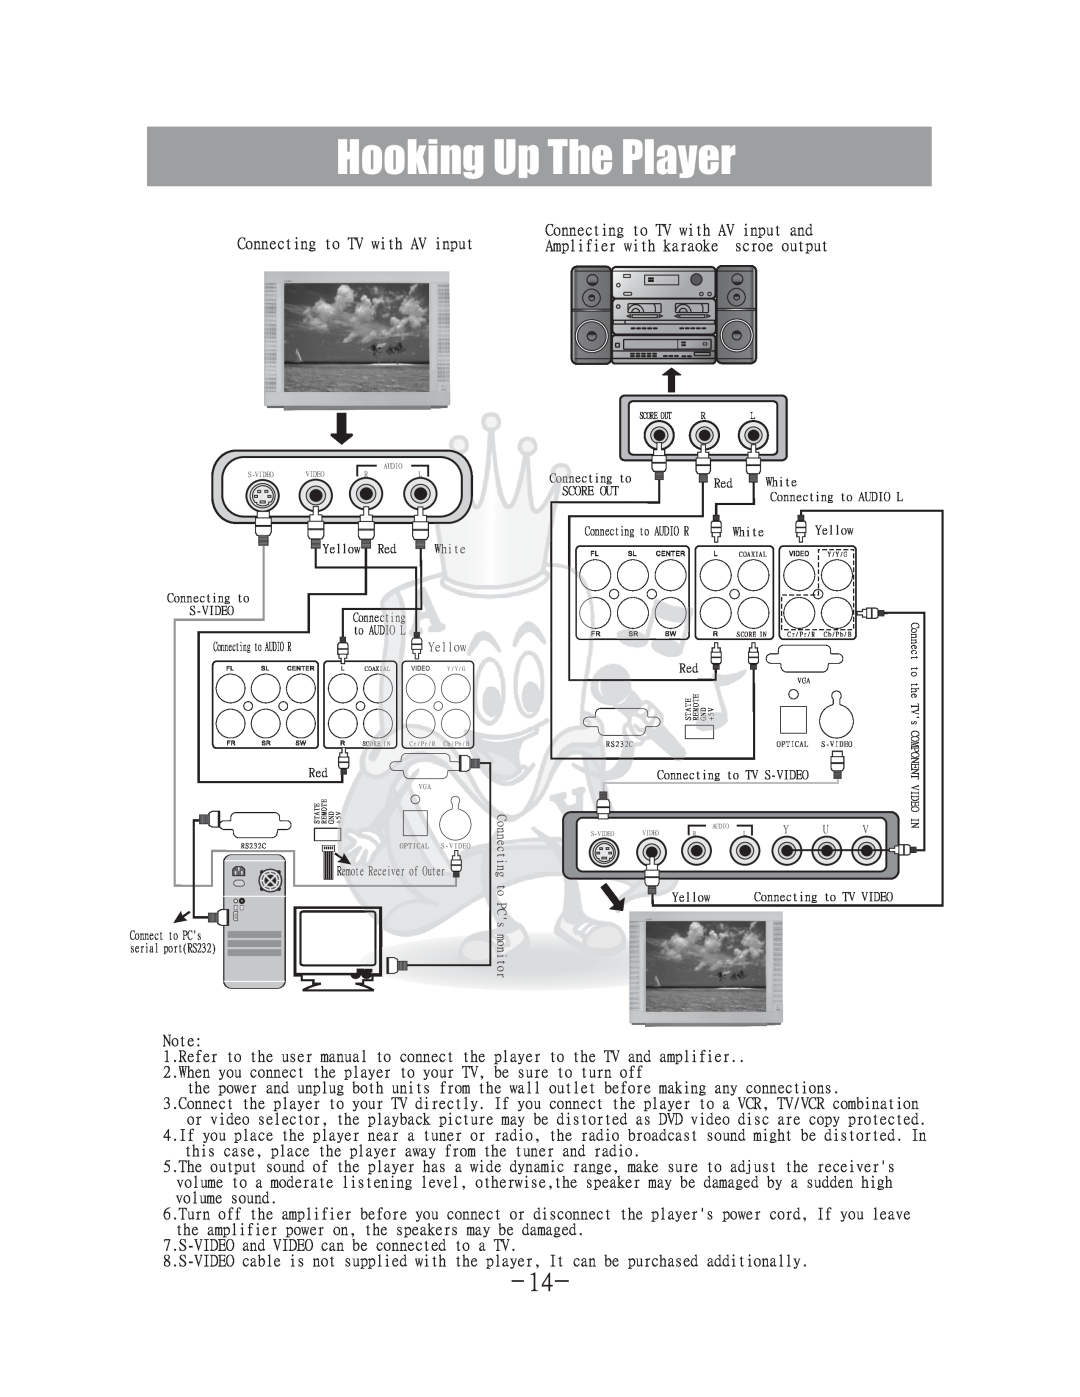 Acesonic DGX-400 user manual Hooking Up The Player 